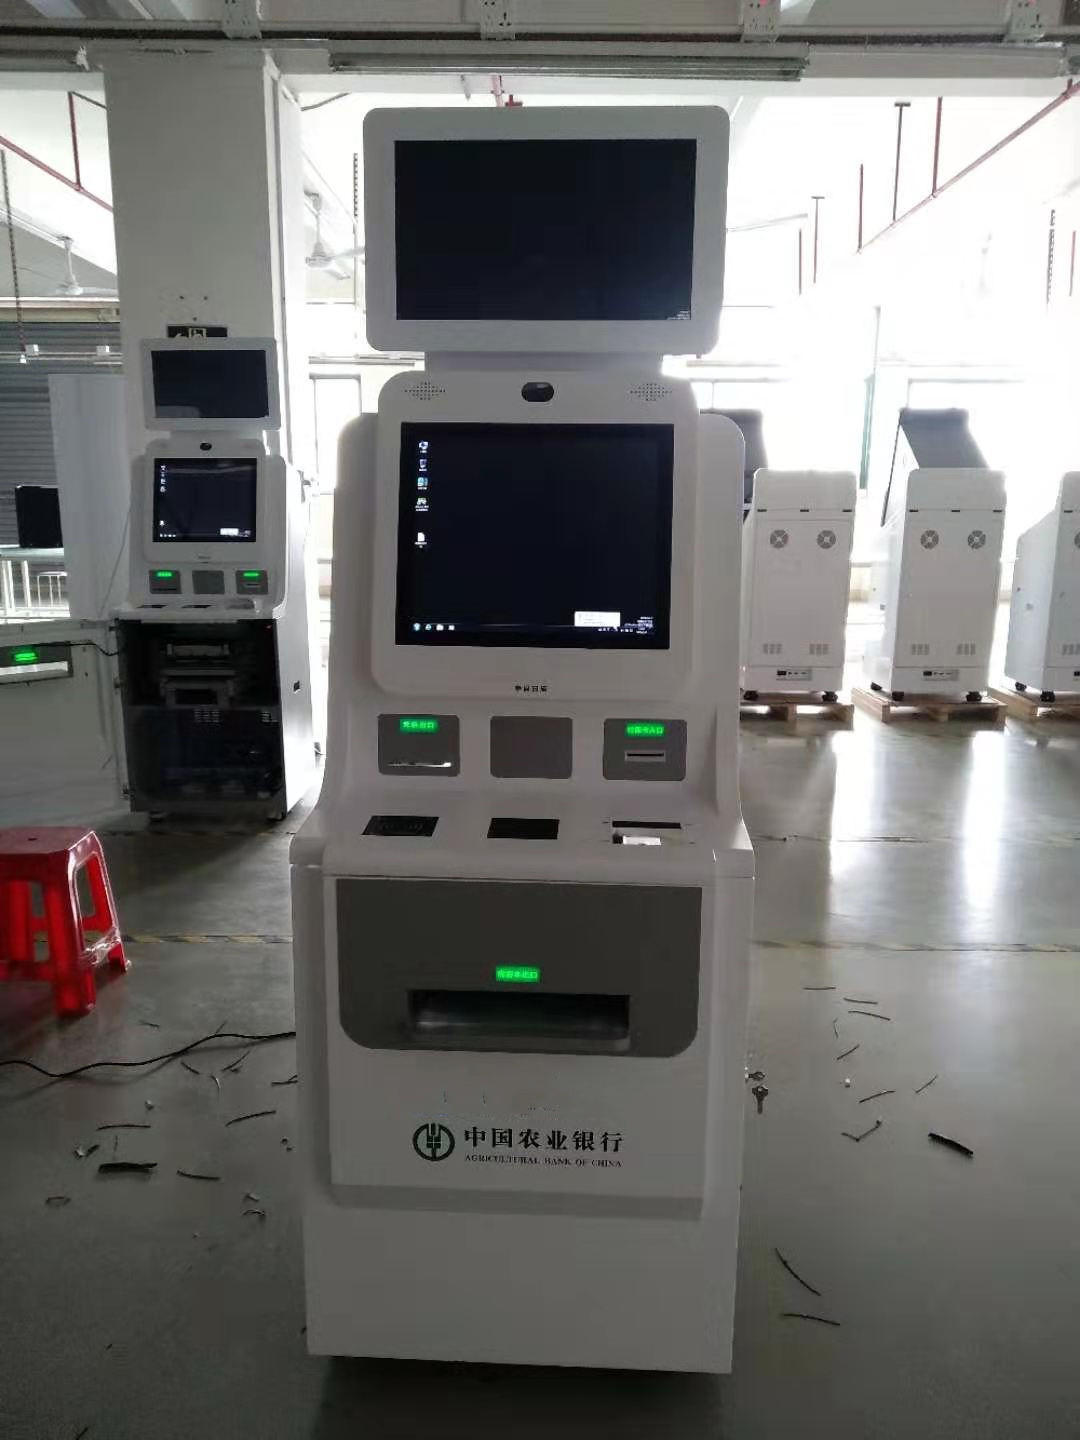 interactive self service pay clinic medical care kiosk terminal supporting bank card and social security card pay